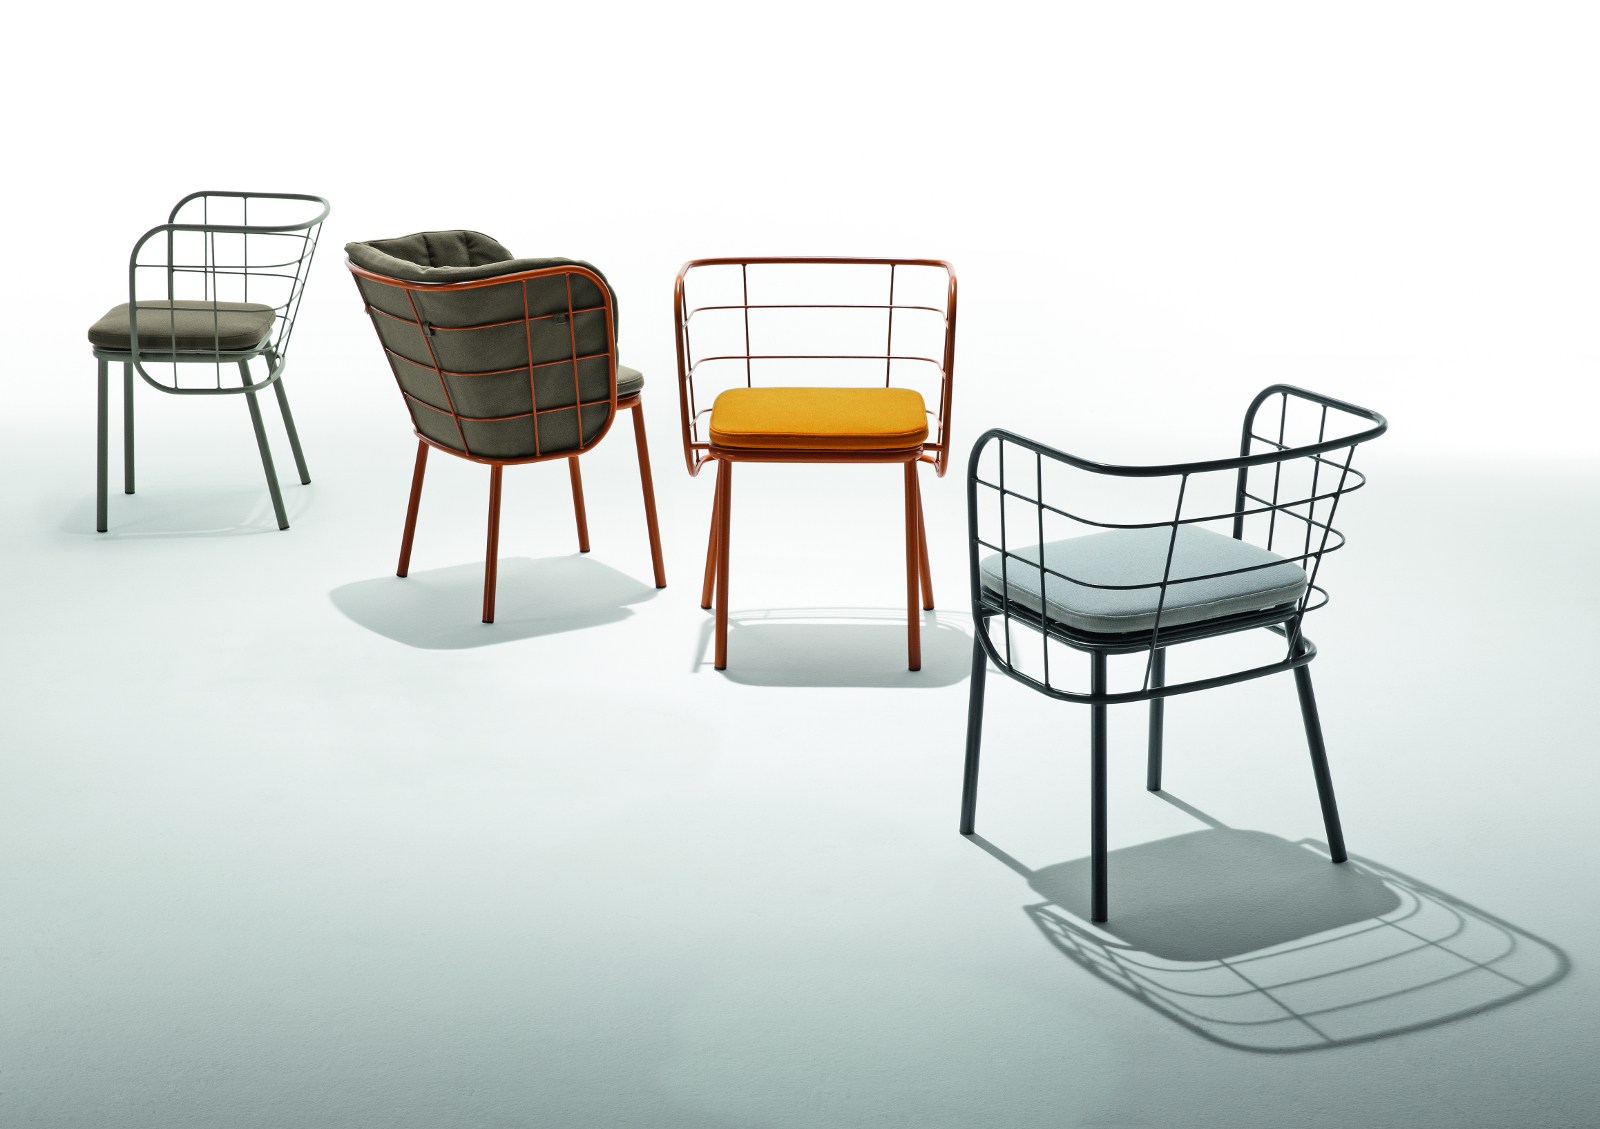 Jujube Collection by 4P1B Design Studio for Chairs & More